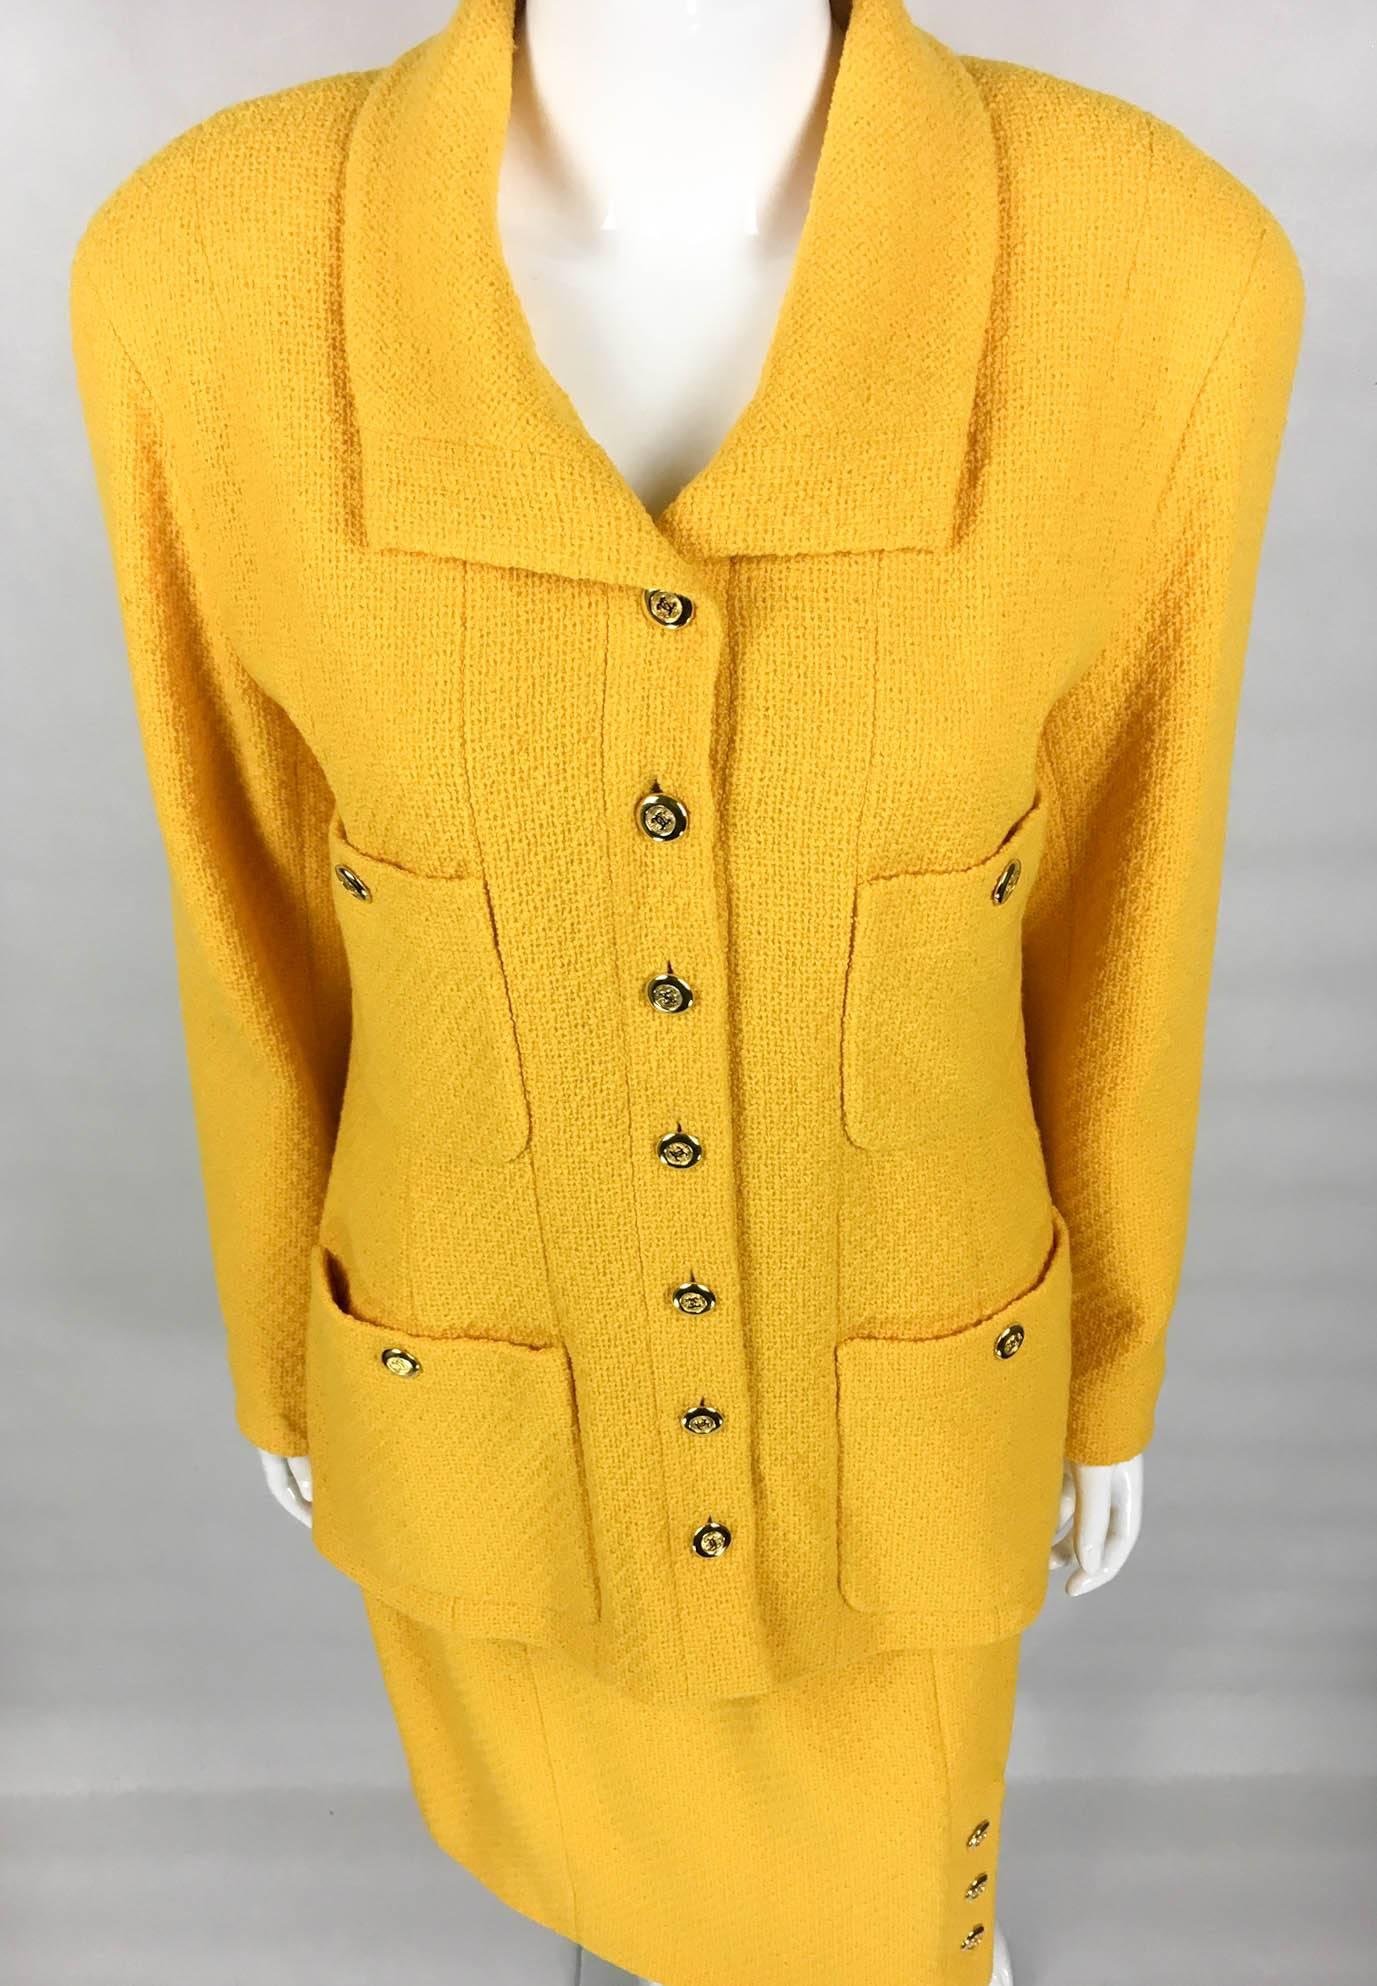 Chanel Yellow Boucle Wool Skirt Suit - Circa 1982 In Excellent Condition In London, Chelsea